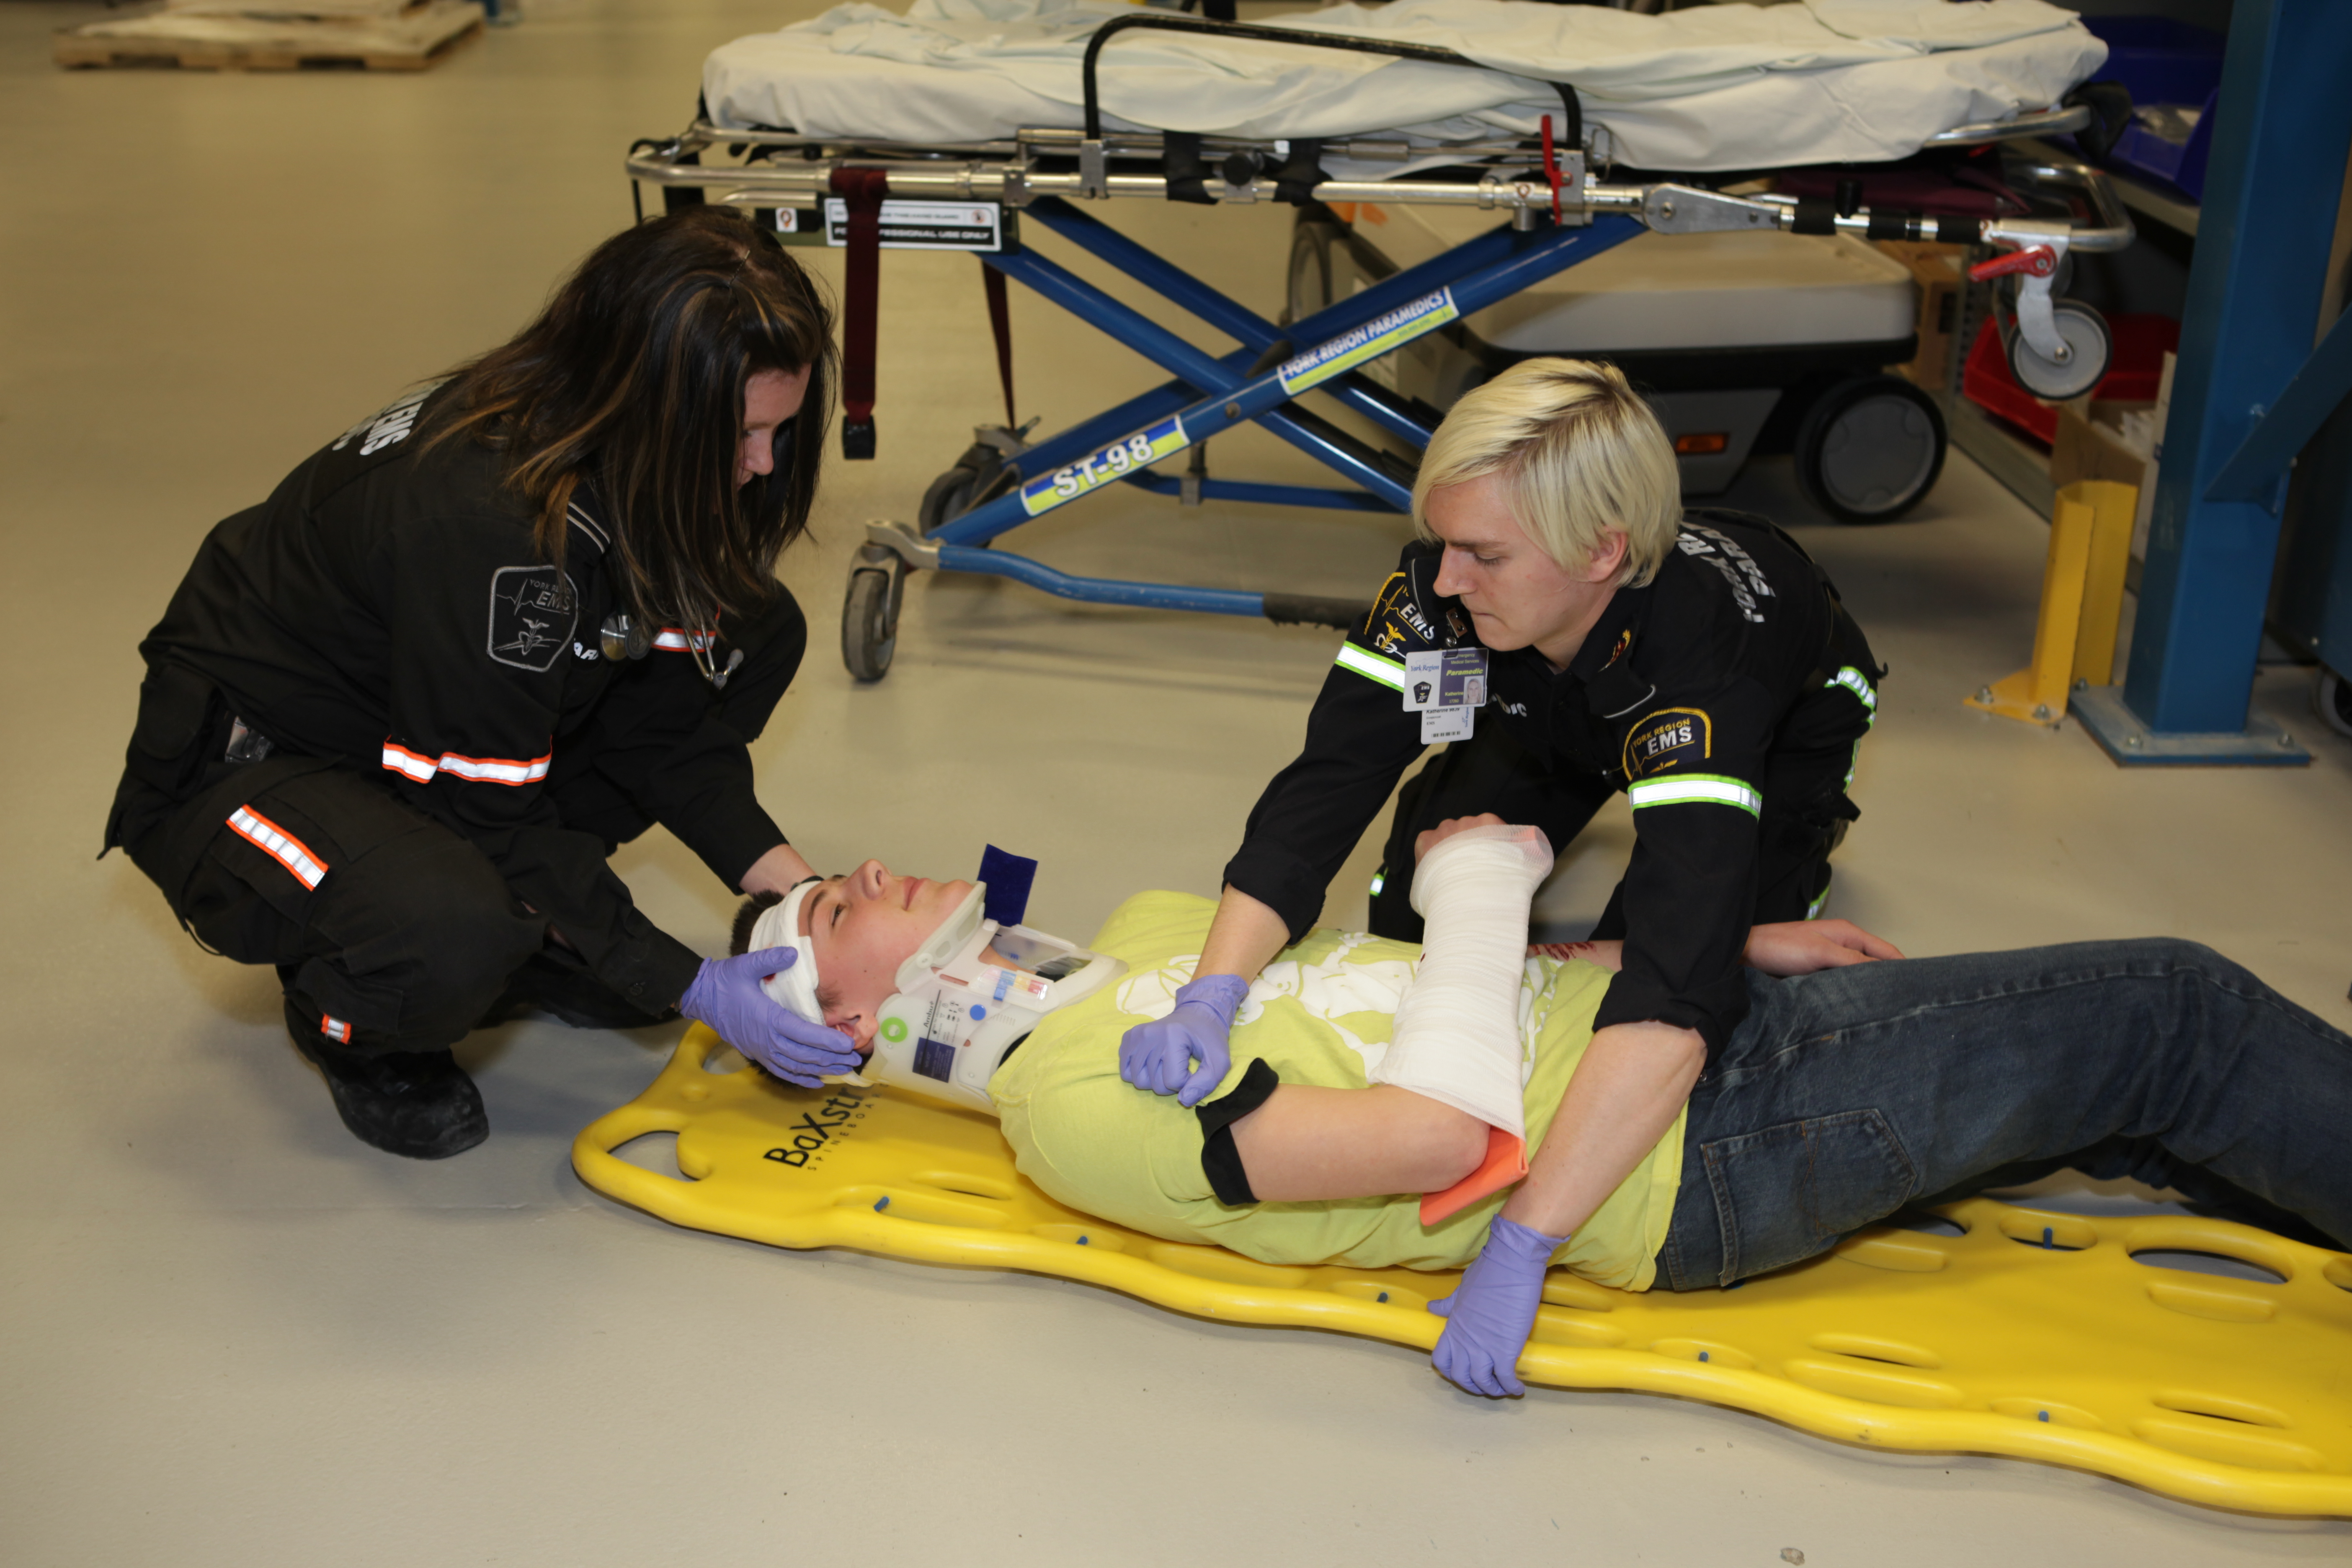 Two paramedics assistince a person lying on the floor with a neck brace